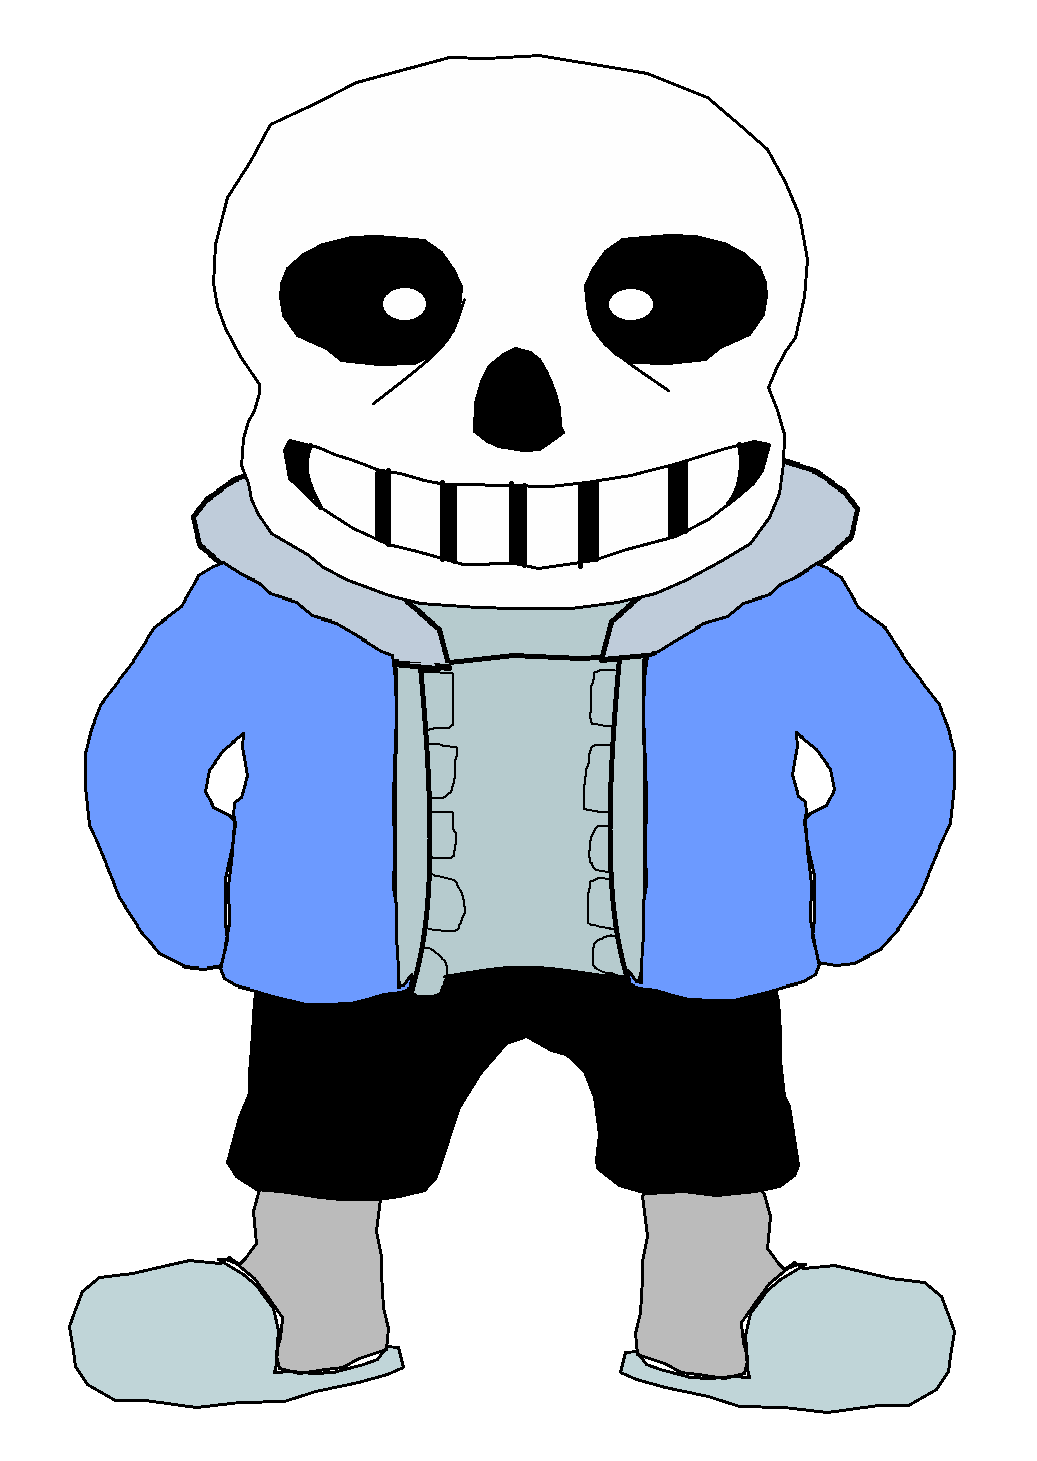 Sans remake by wrenchy. Clipart skeleton angry